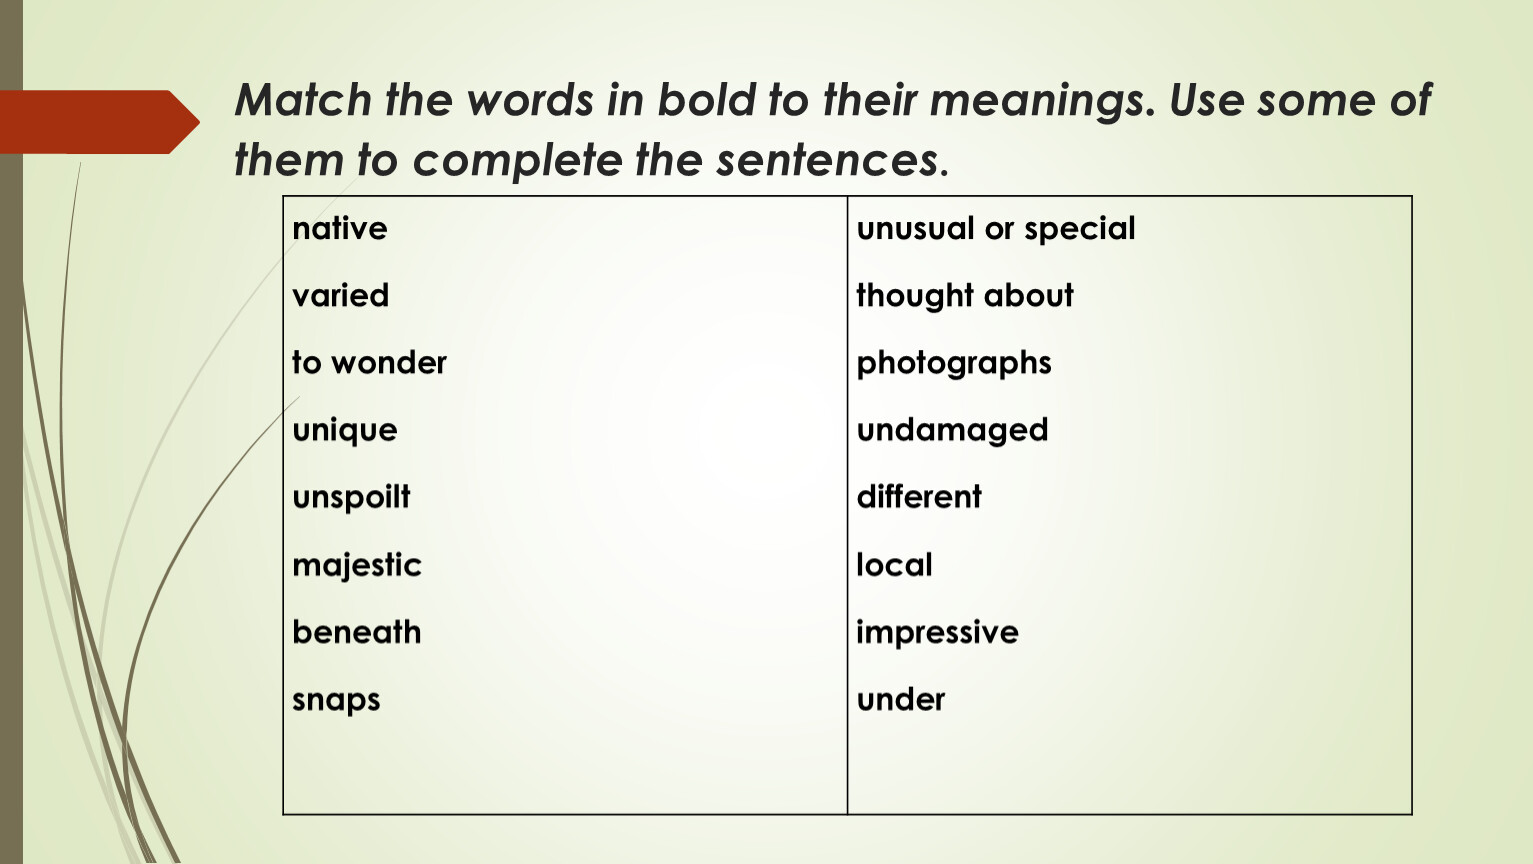 Match the phrases in bold